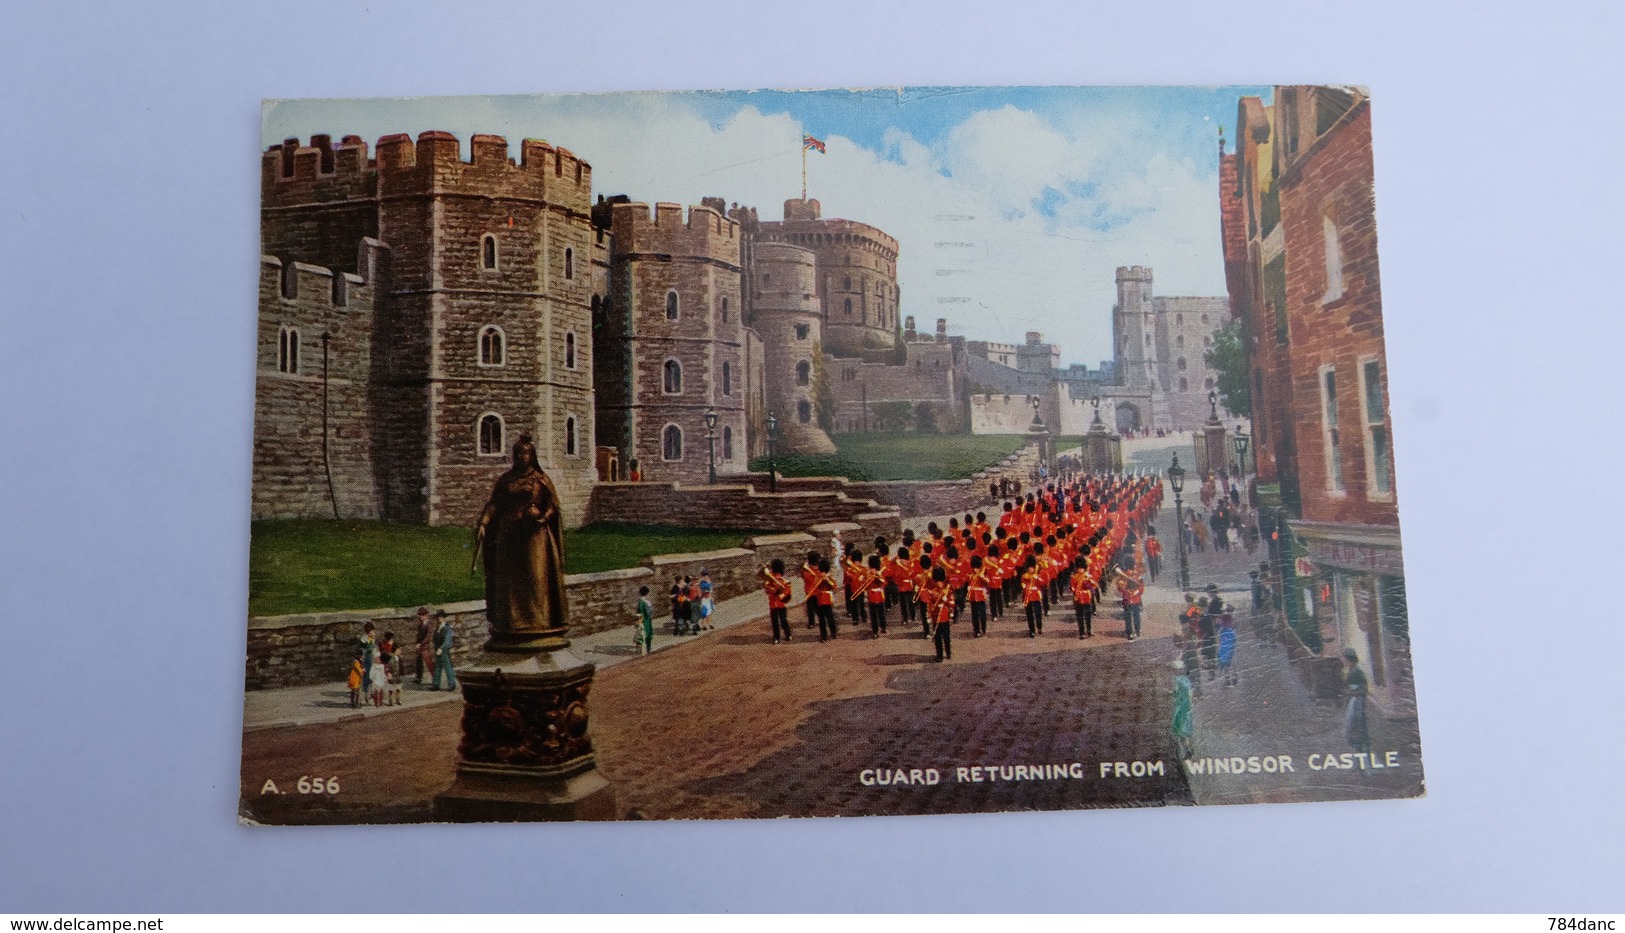 Guard Returning From Windsor Castle Statue Chateau ! 1963  Stamp ! - Buckingham Palace